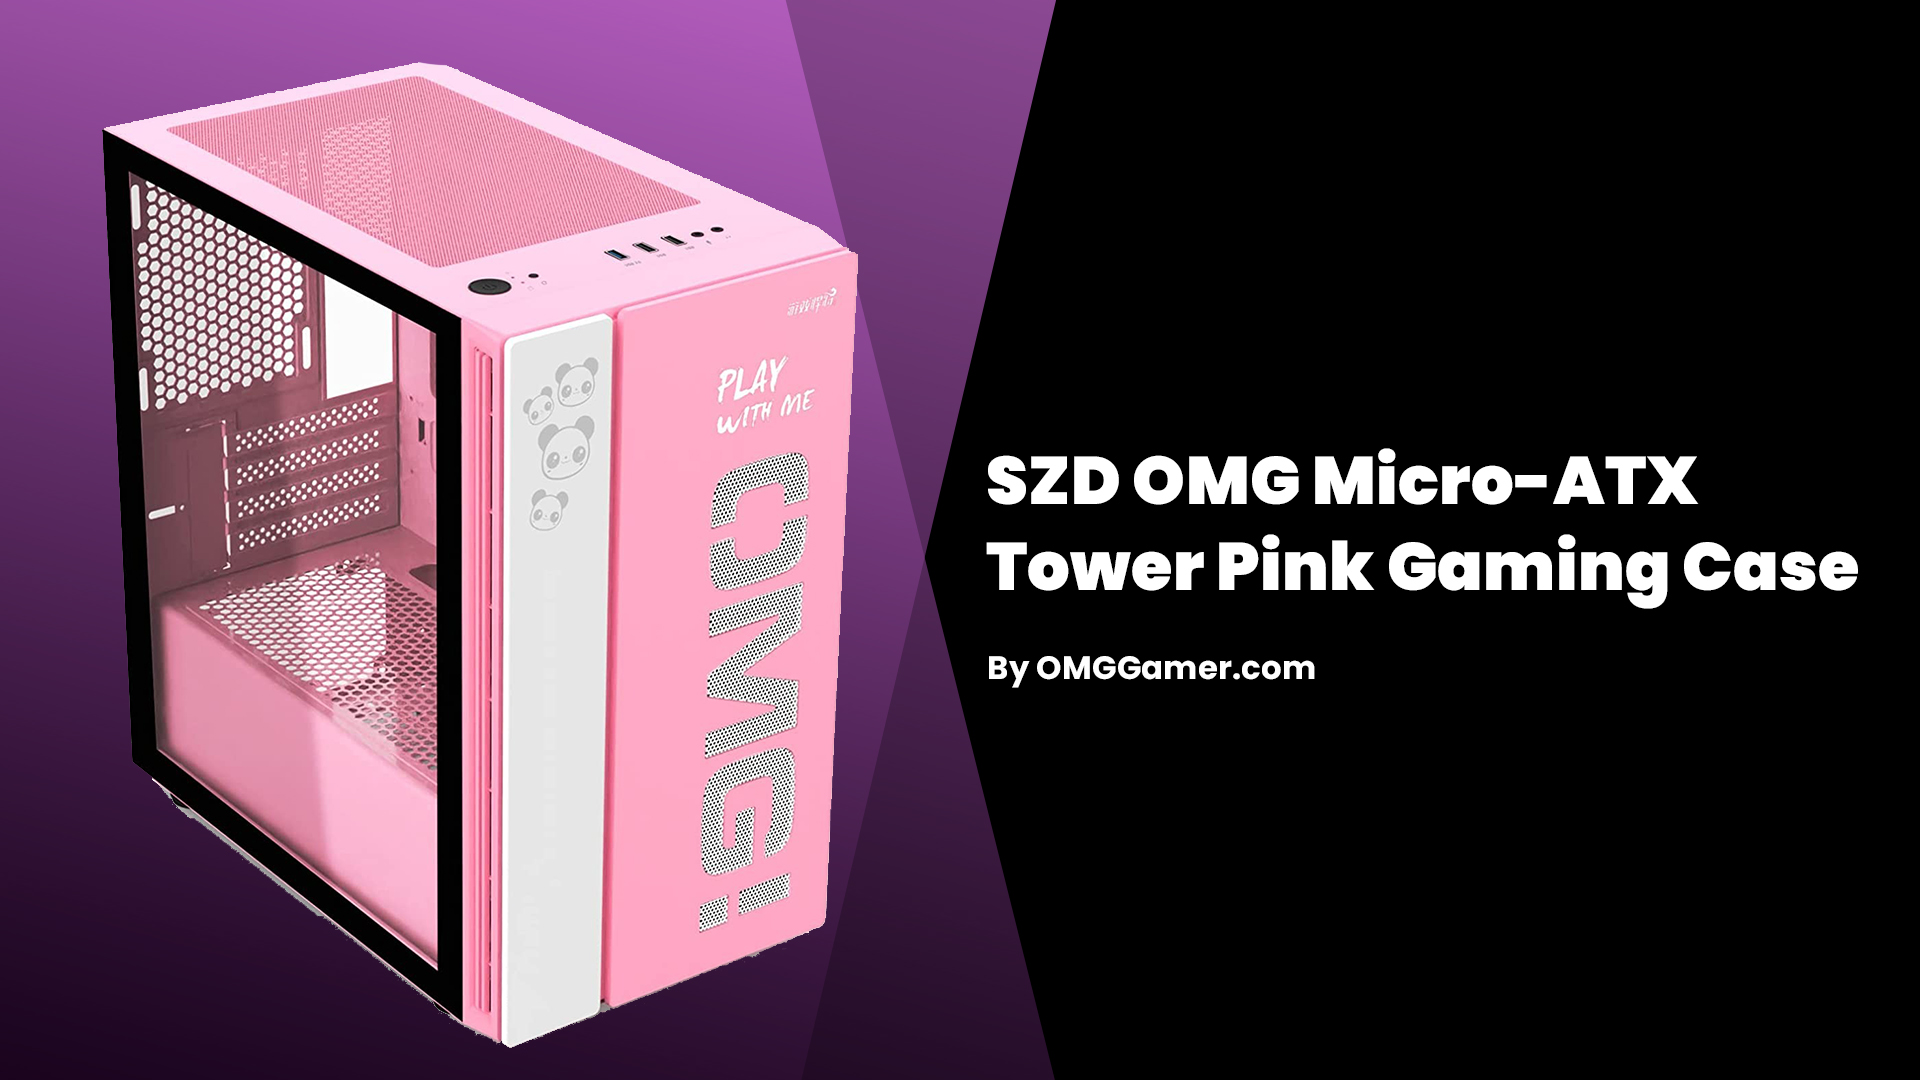 SZD OMG Micro-ATX Tower Pink Gaming Case